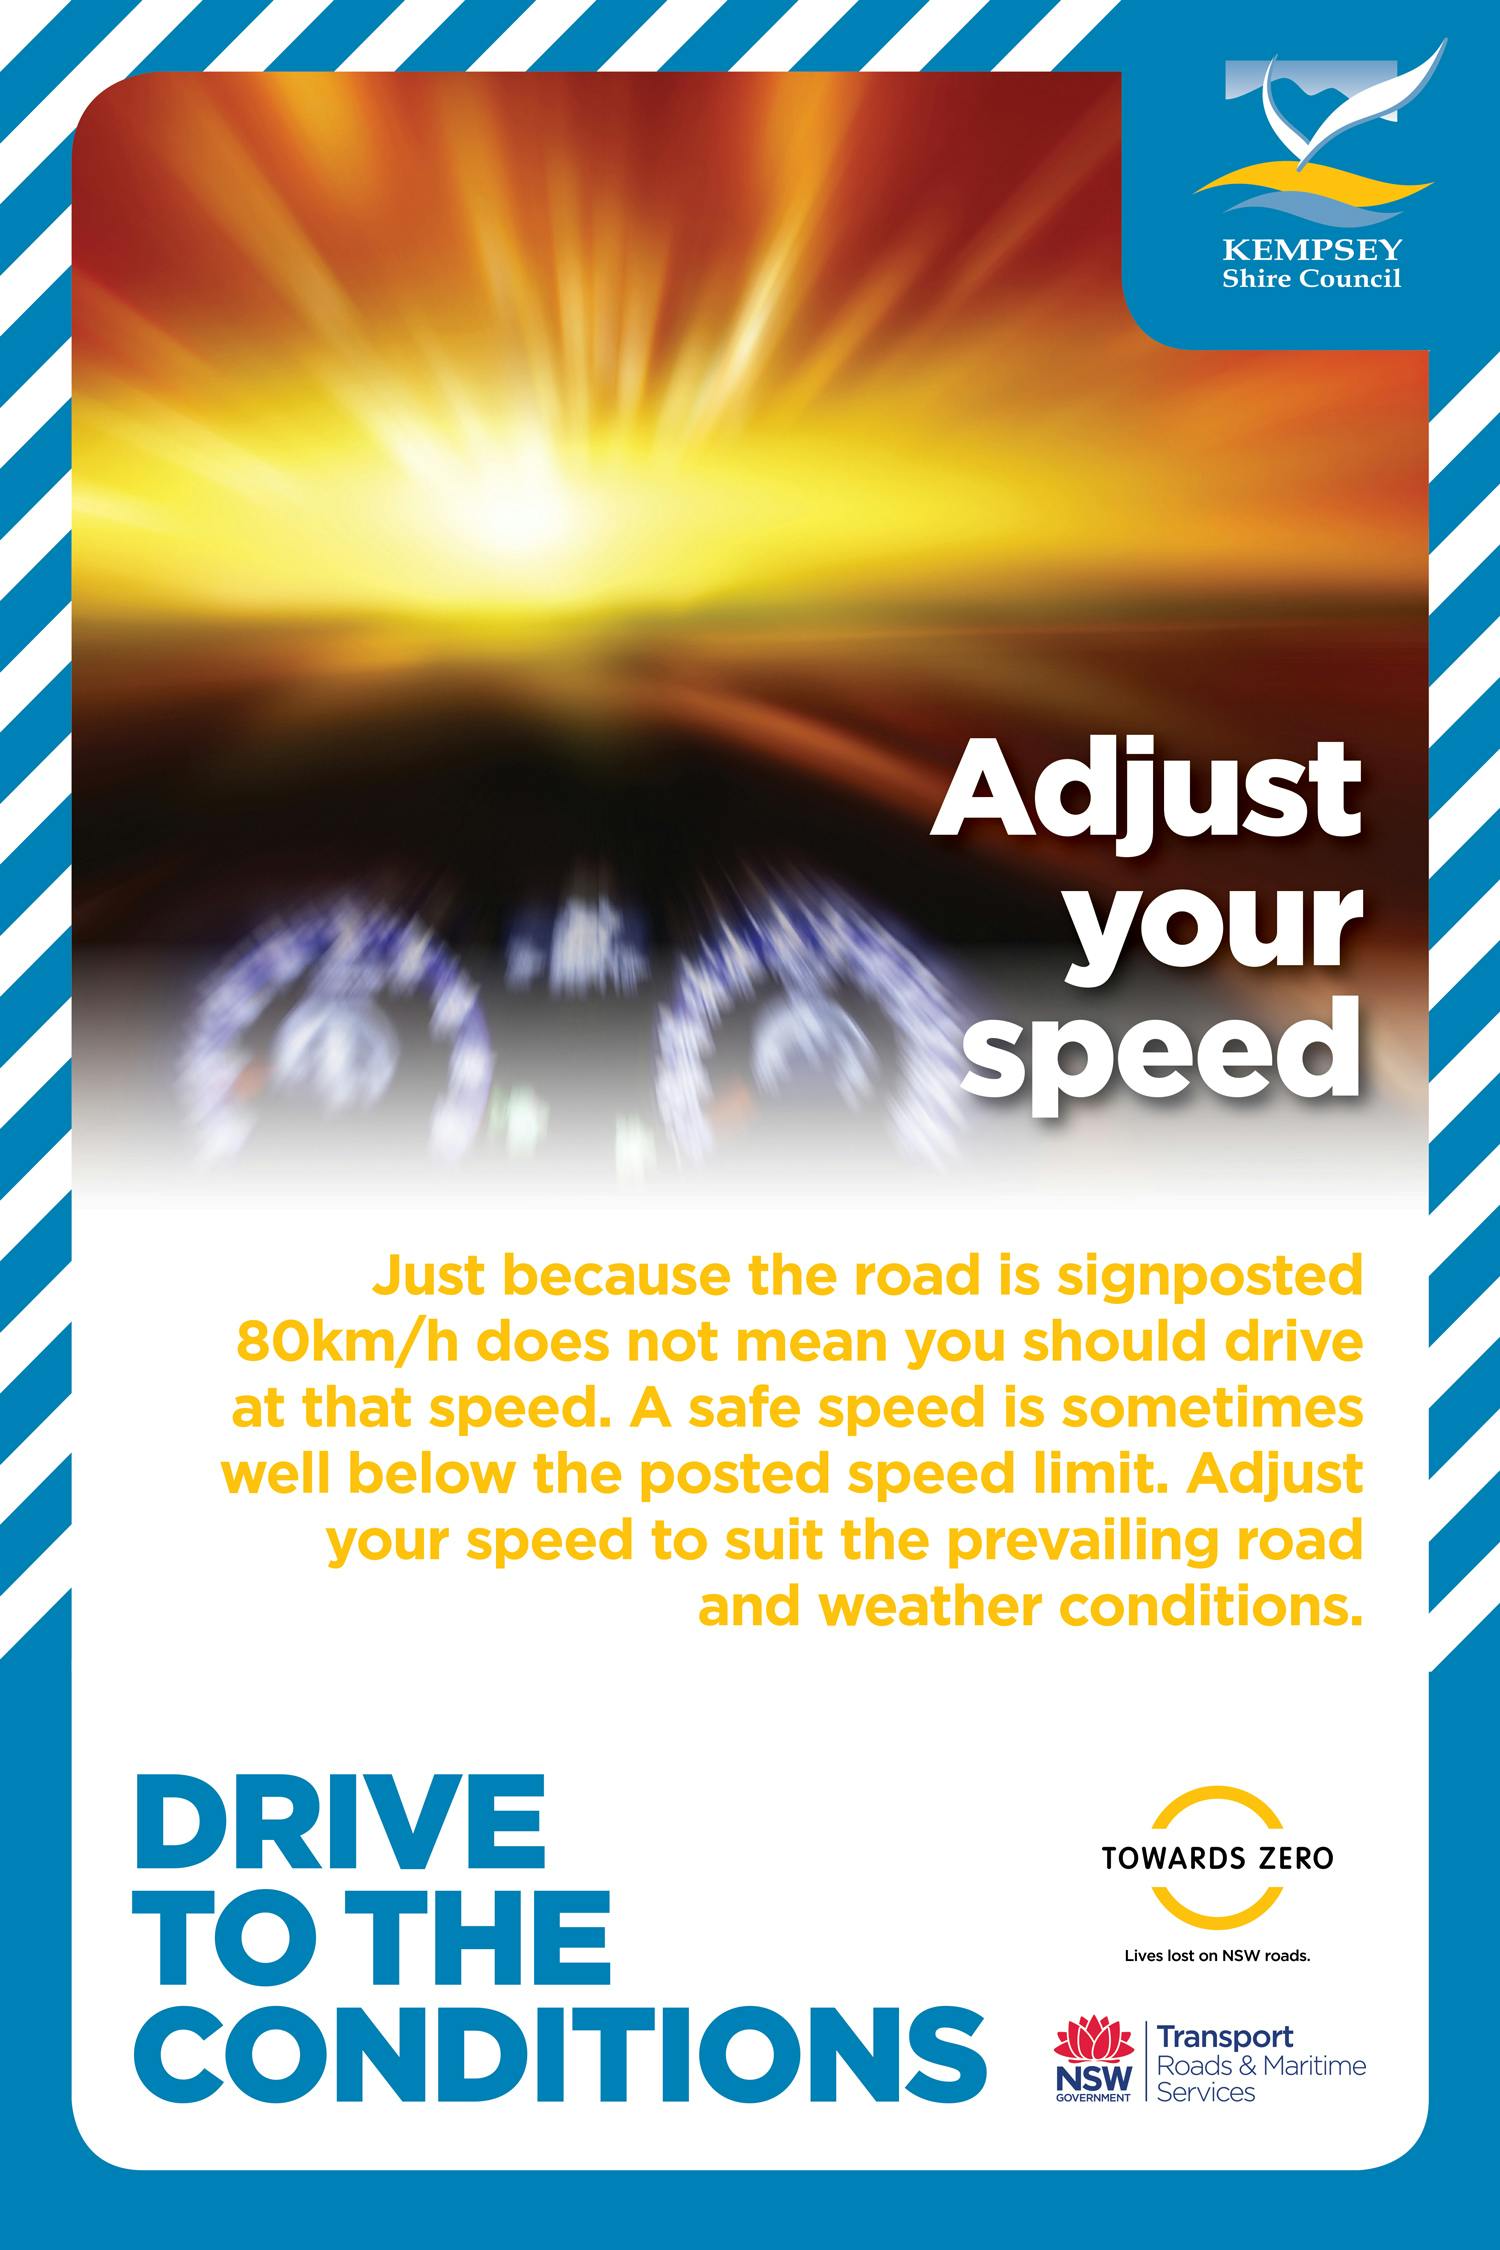 Adjust your speed to the conditions